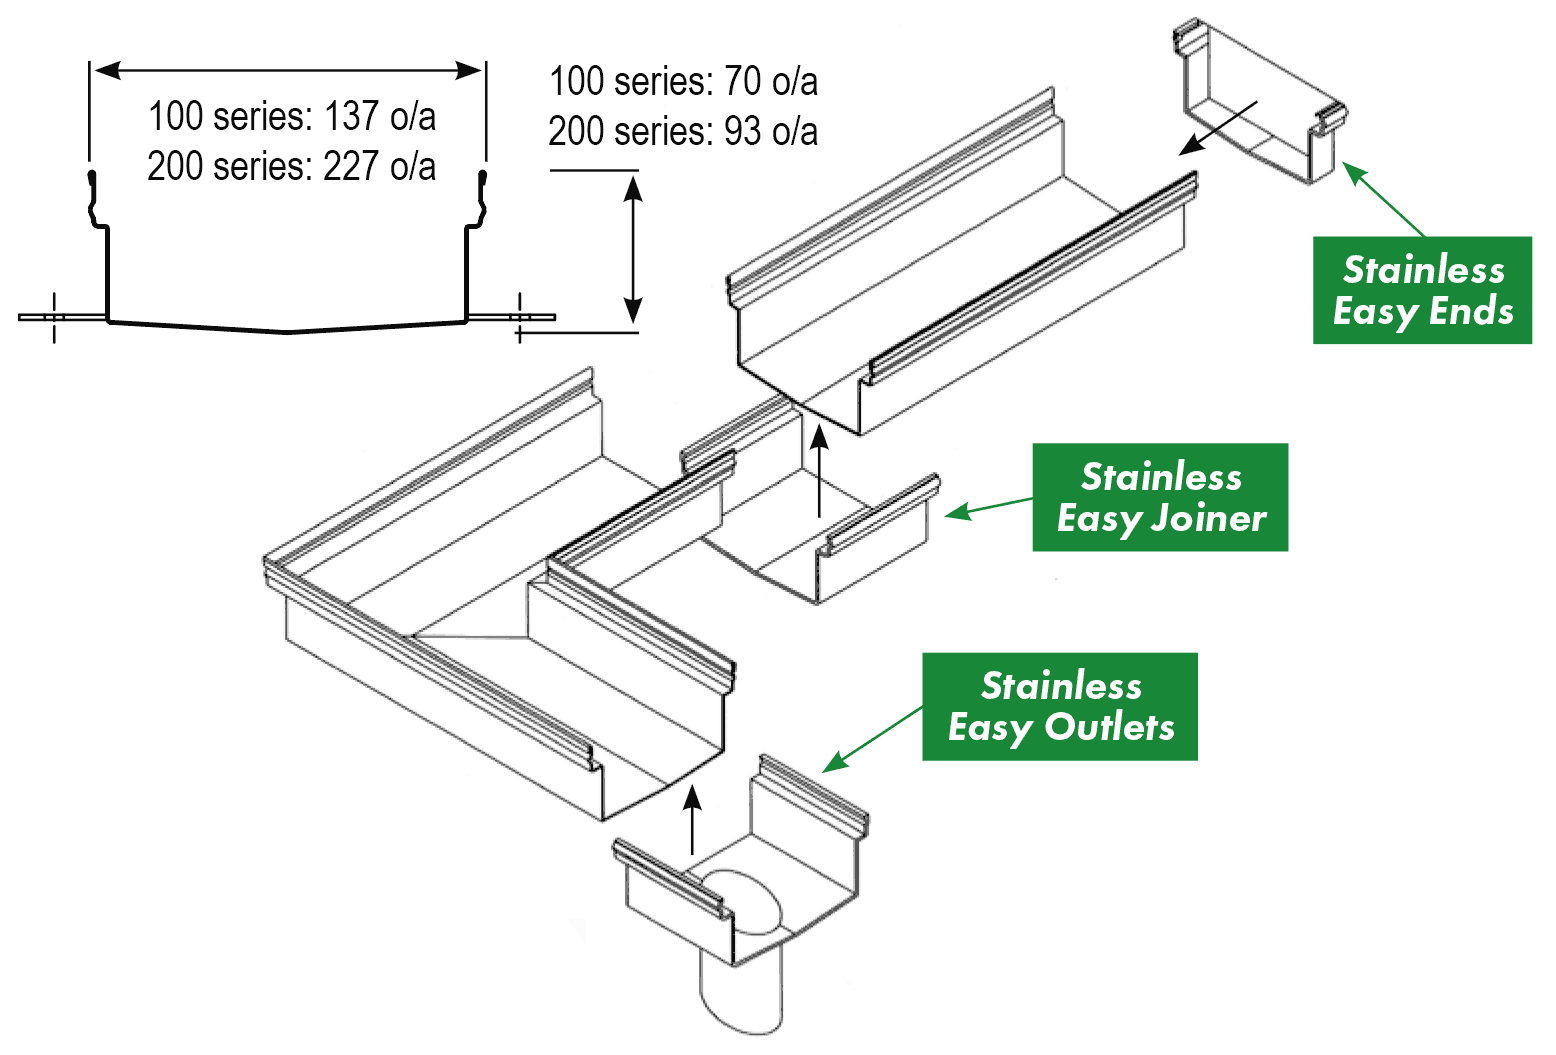 Click Drain size diagram: profile 137 x 70 o/a or 227 x 93 o/a, Stainless Easy Ends, Stainless Easy Joiner, Stainless Easy Outlets